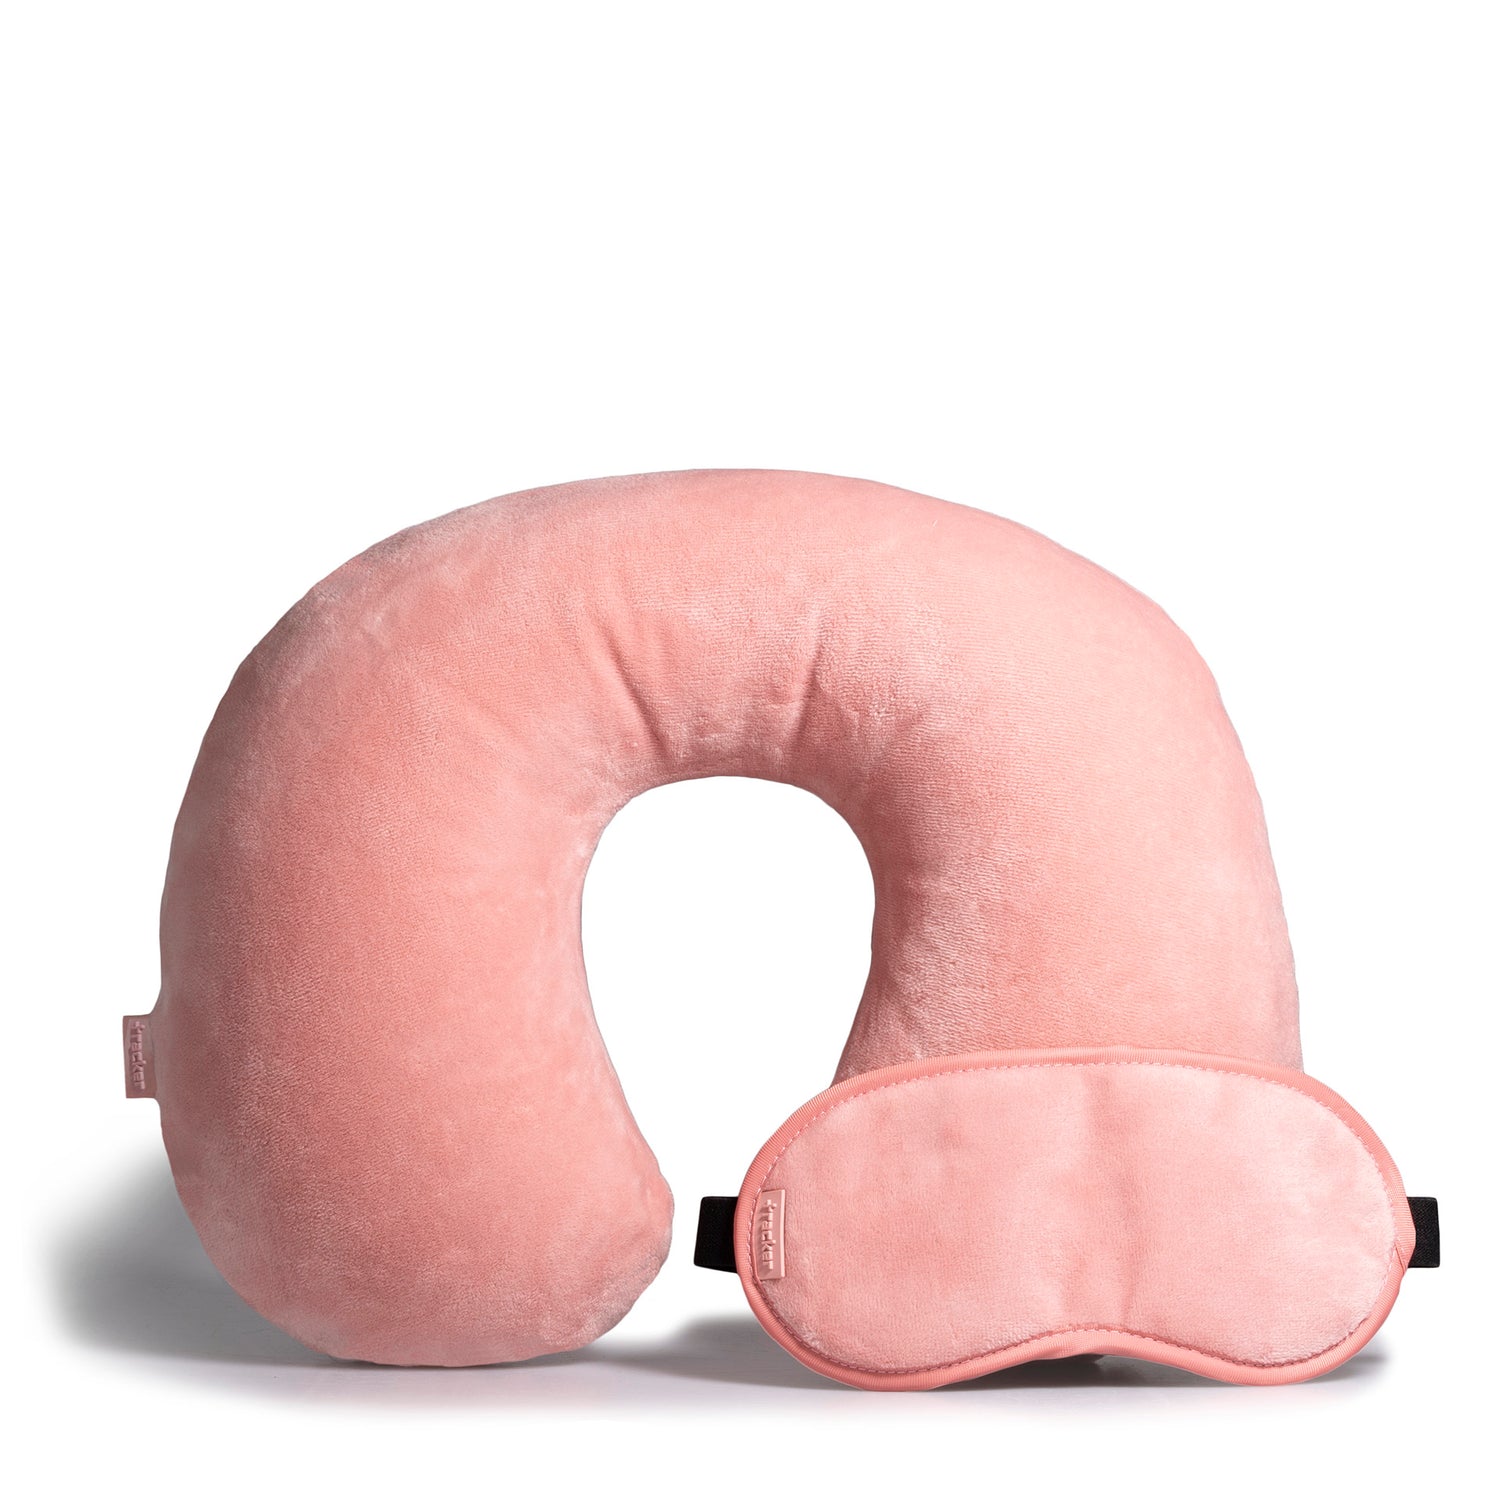 Pink travel pillow and eye mask designed by Tracker showing their plush fleece textures, and both are leaning on each other.